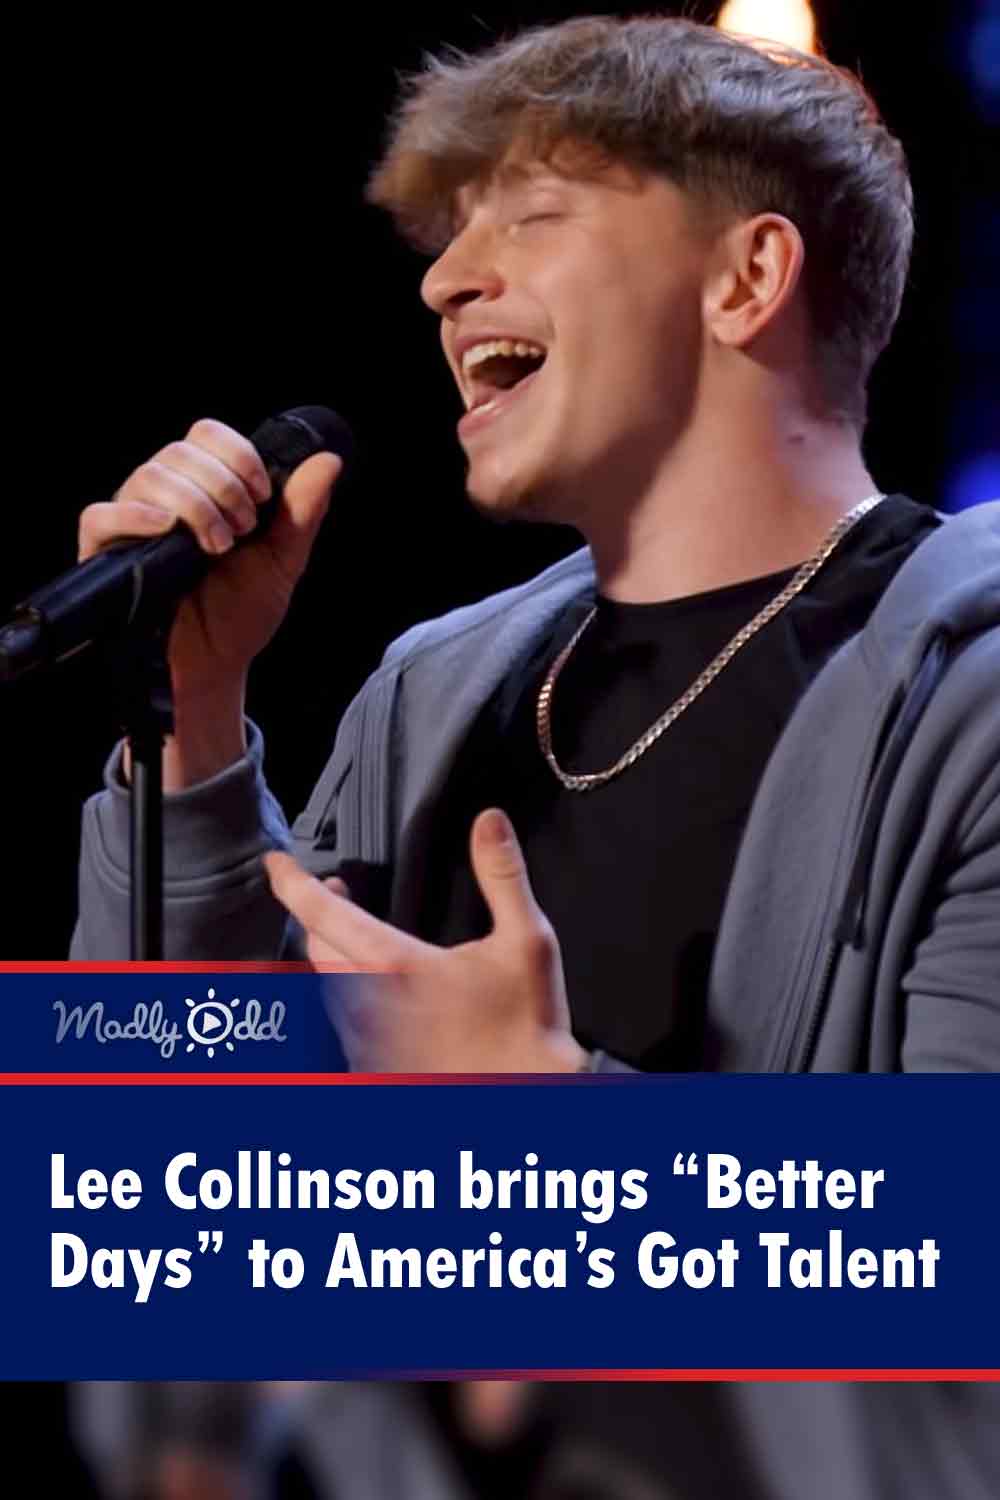 Lee Collinson brings “Better Days” to America’s Got Talent